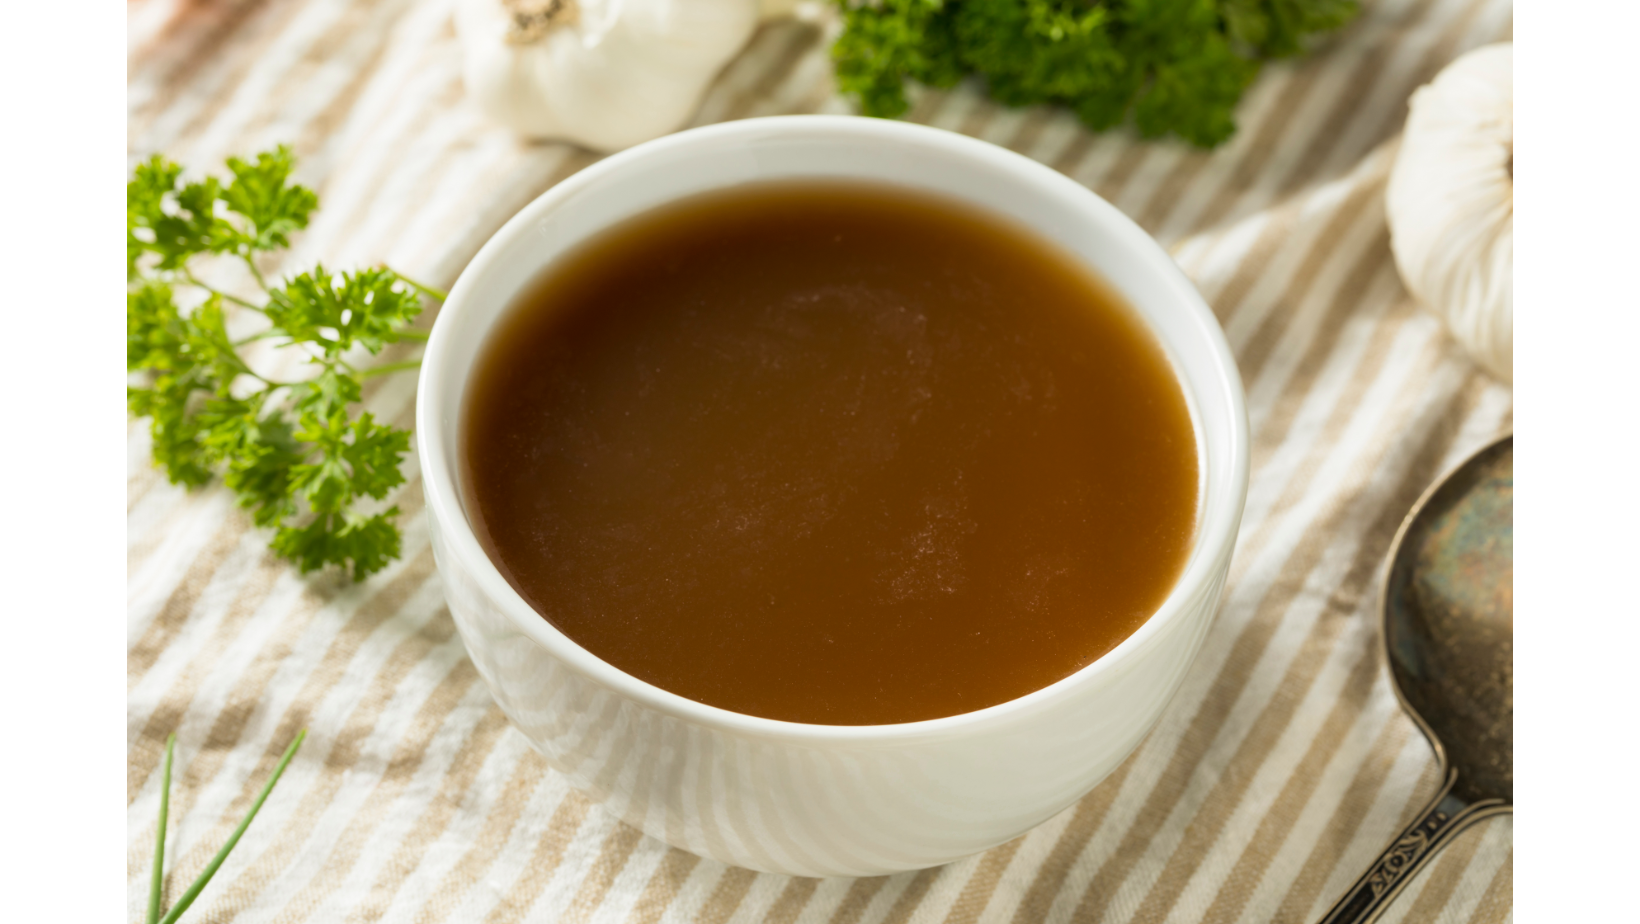 Bone broth is one of the few foods/beverages we consume that actually has collagen in it. It’s available in powder form and is an easy collagen food supplement.